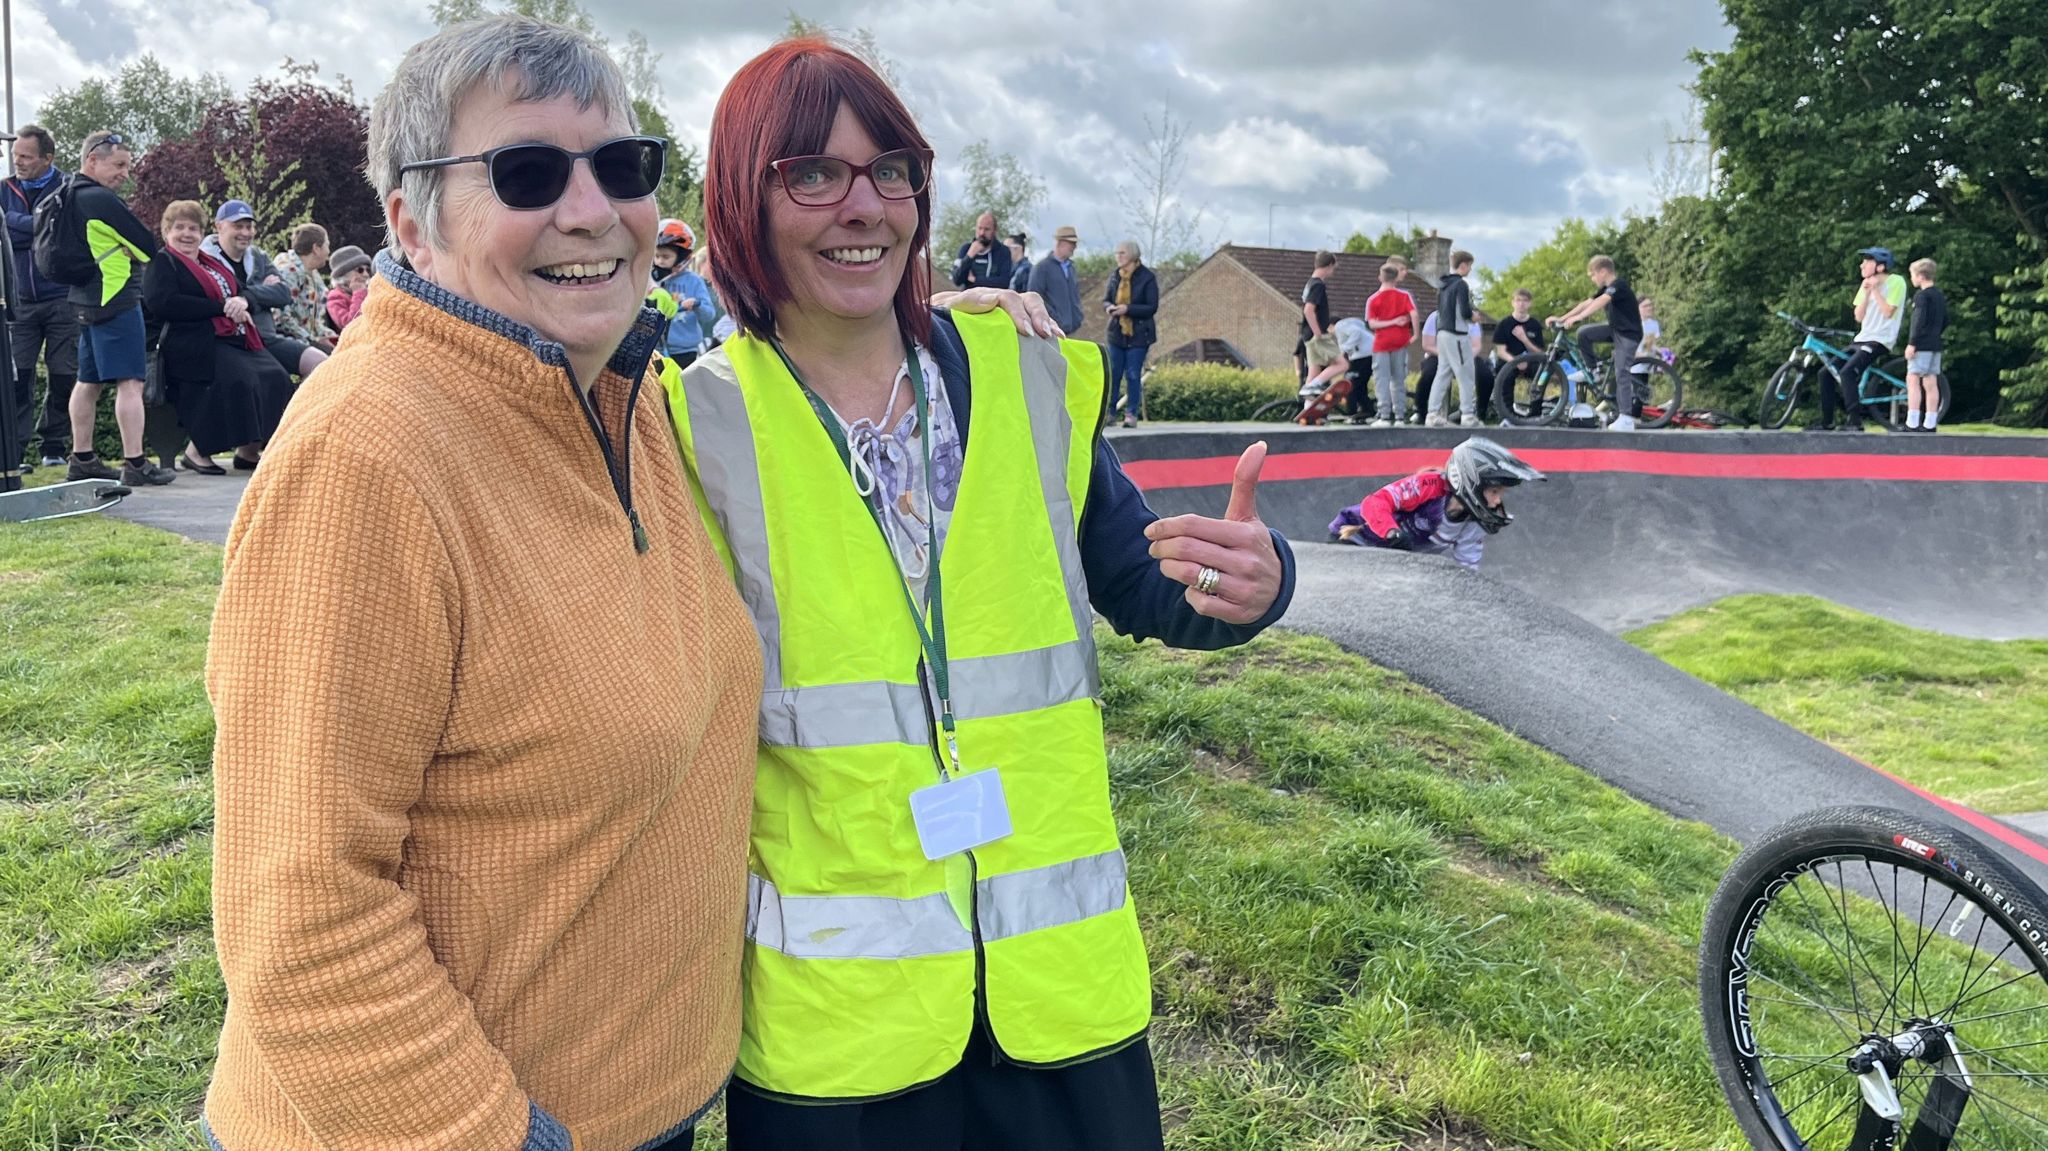 Pewsey Parish Councillors, Marilyn Hunt and Lisa Brindley stood on the edge of the pump track, Lisa with a thumb up wearing a high visibility vest and Marilyn wearing sunglasses, both smiling